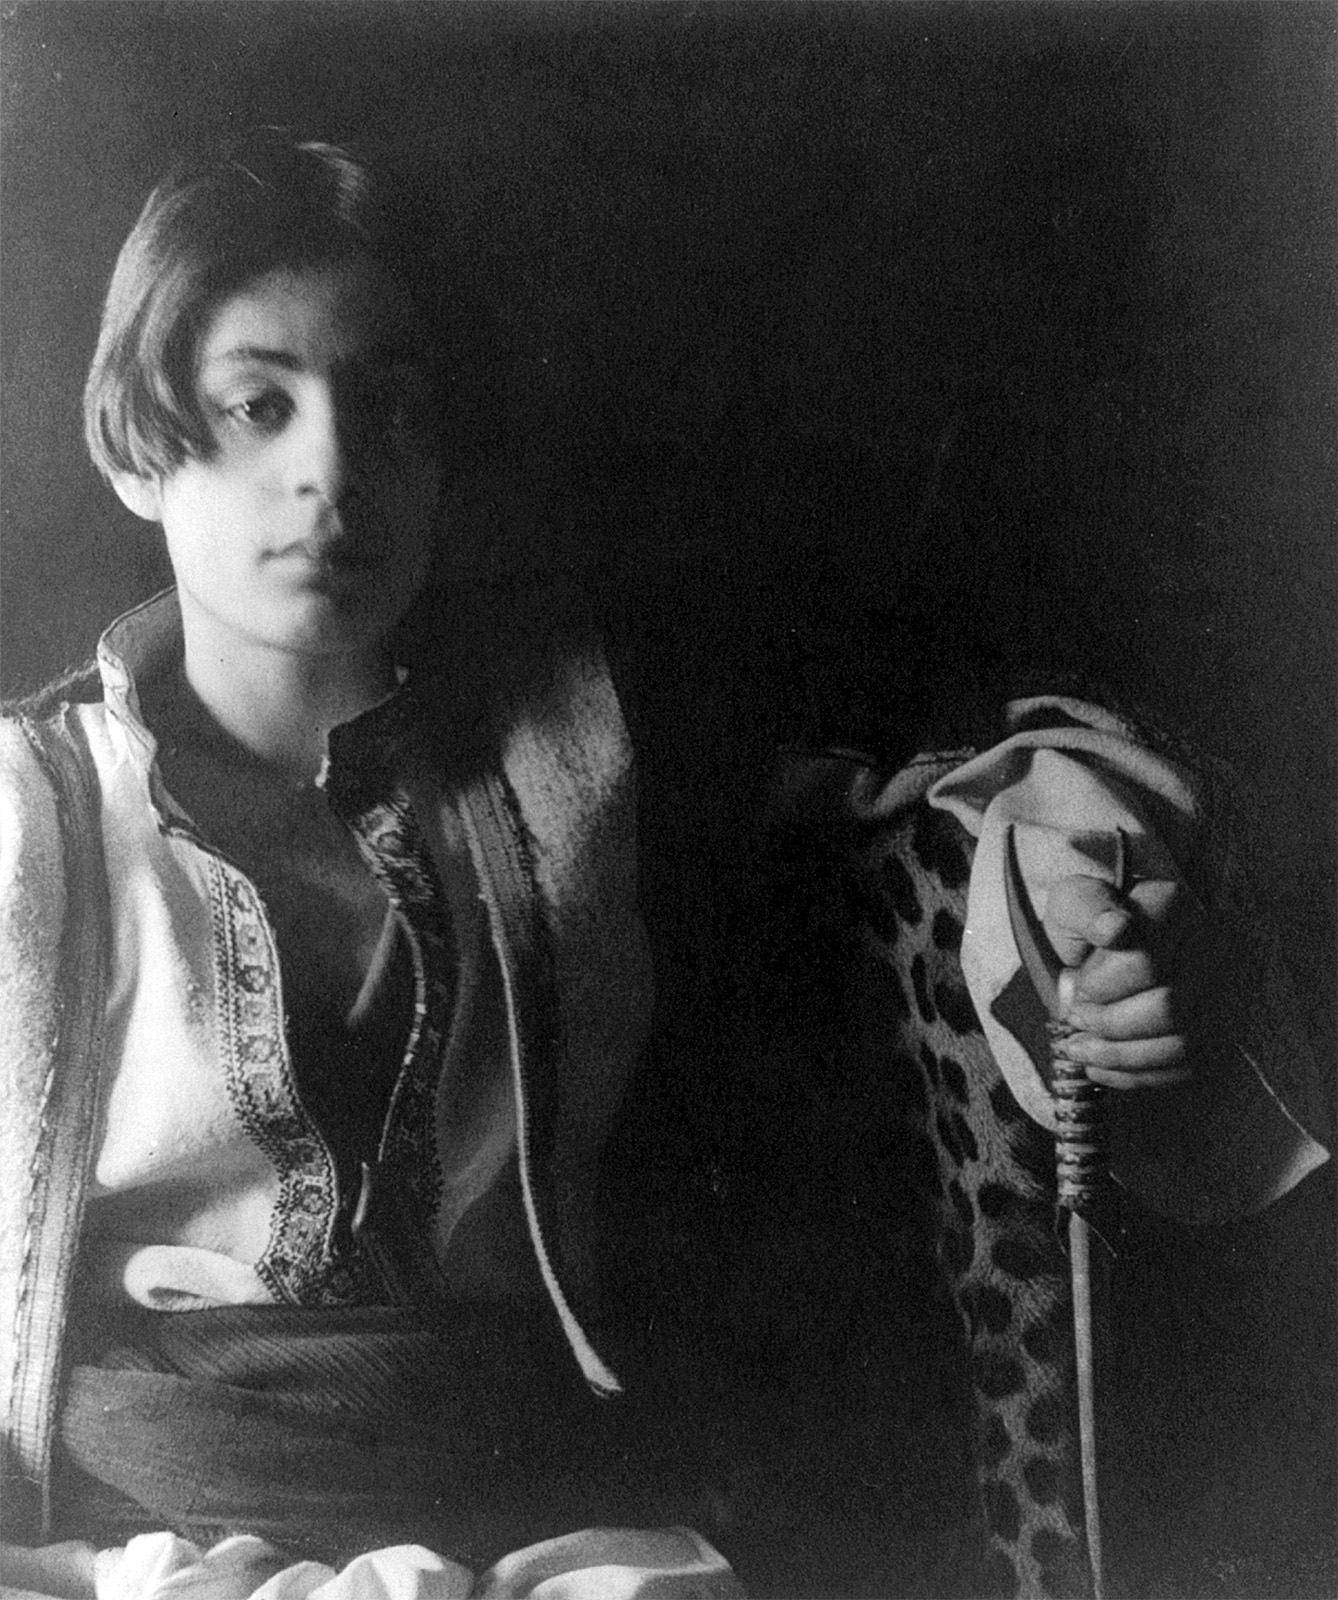 This portrait of 15-year-old Kahlil Gibran was made in 1898 by one of his mentors, photographer and publisher Fred Holland Day. 